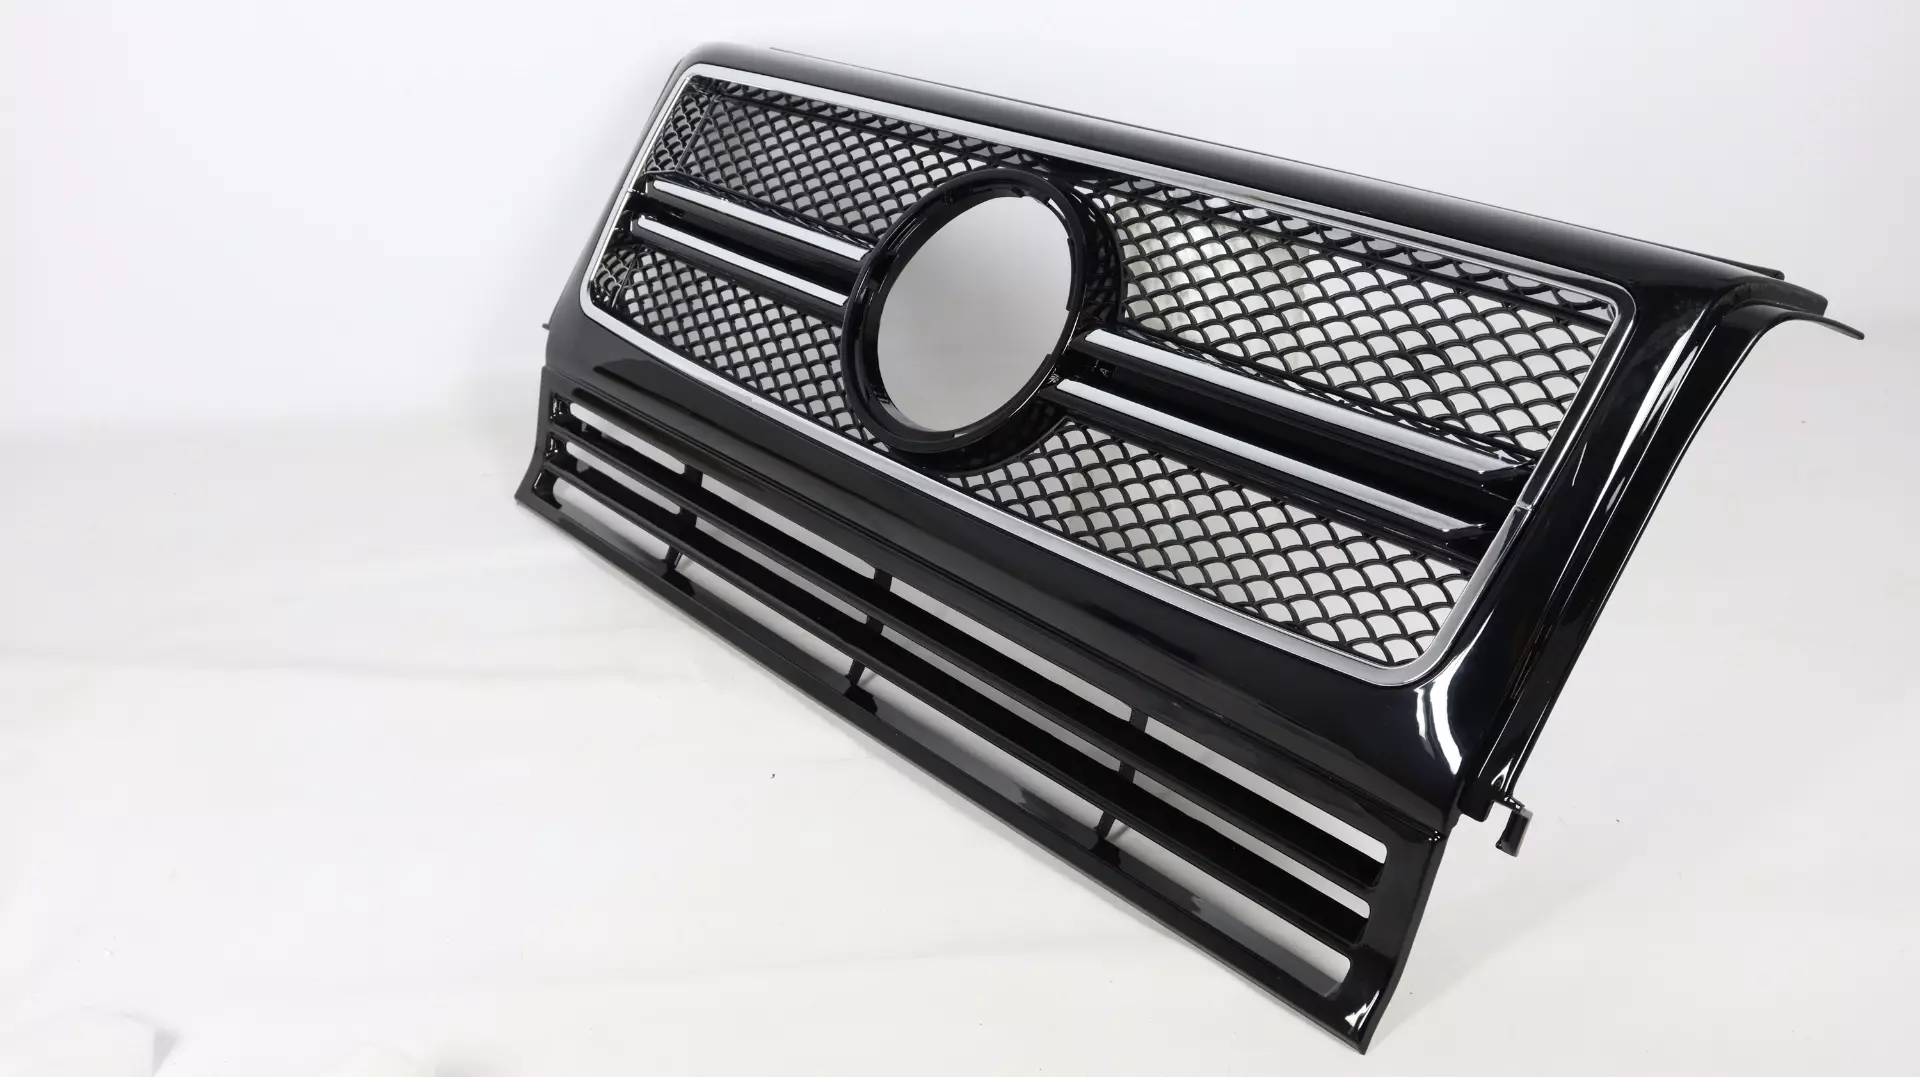 Grill G63 AMG  for Mercedes G-class W463 (1979-2018)